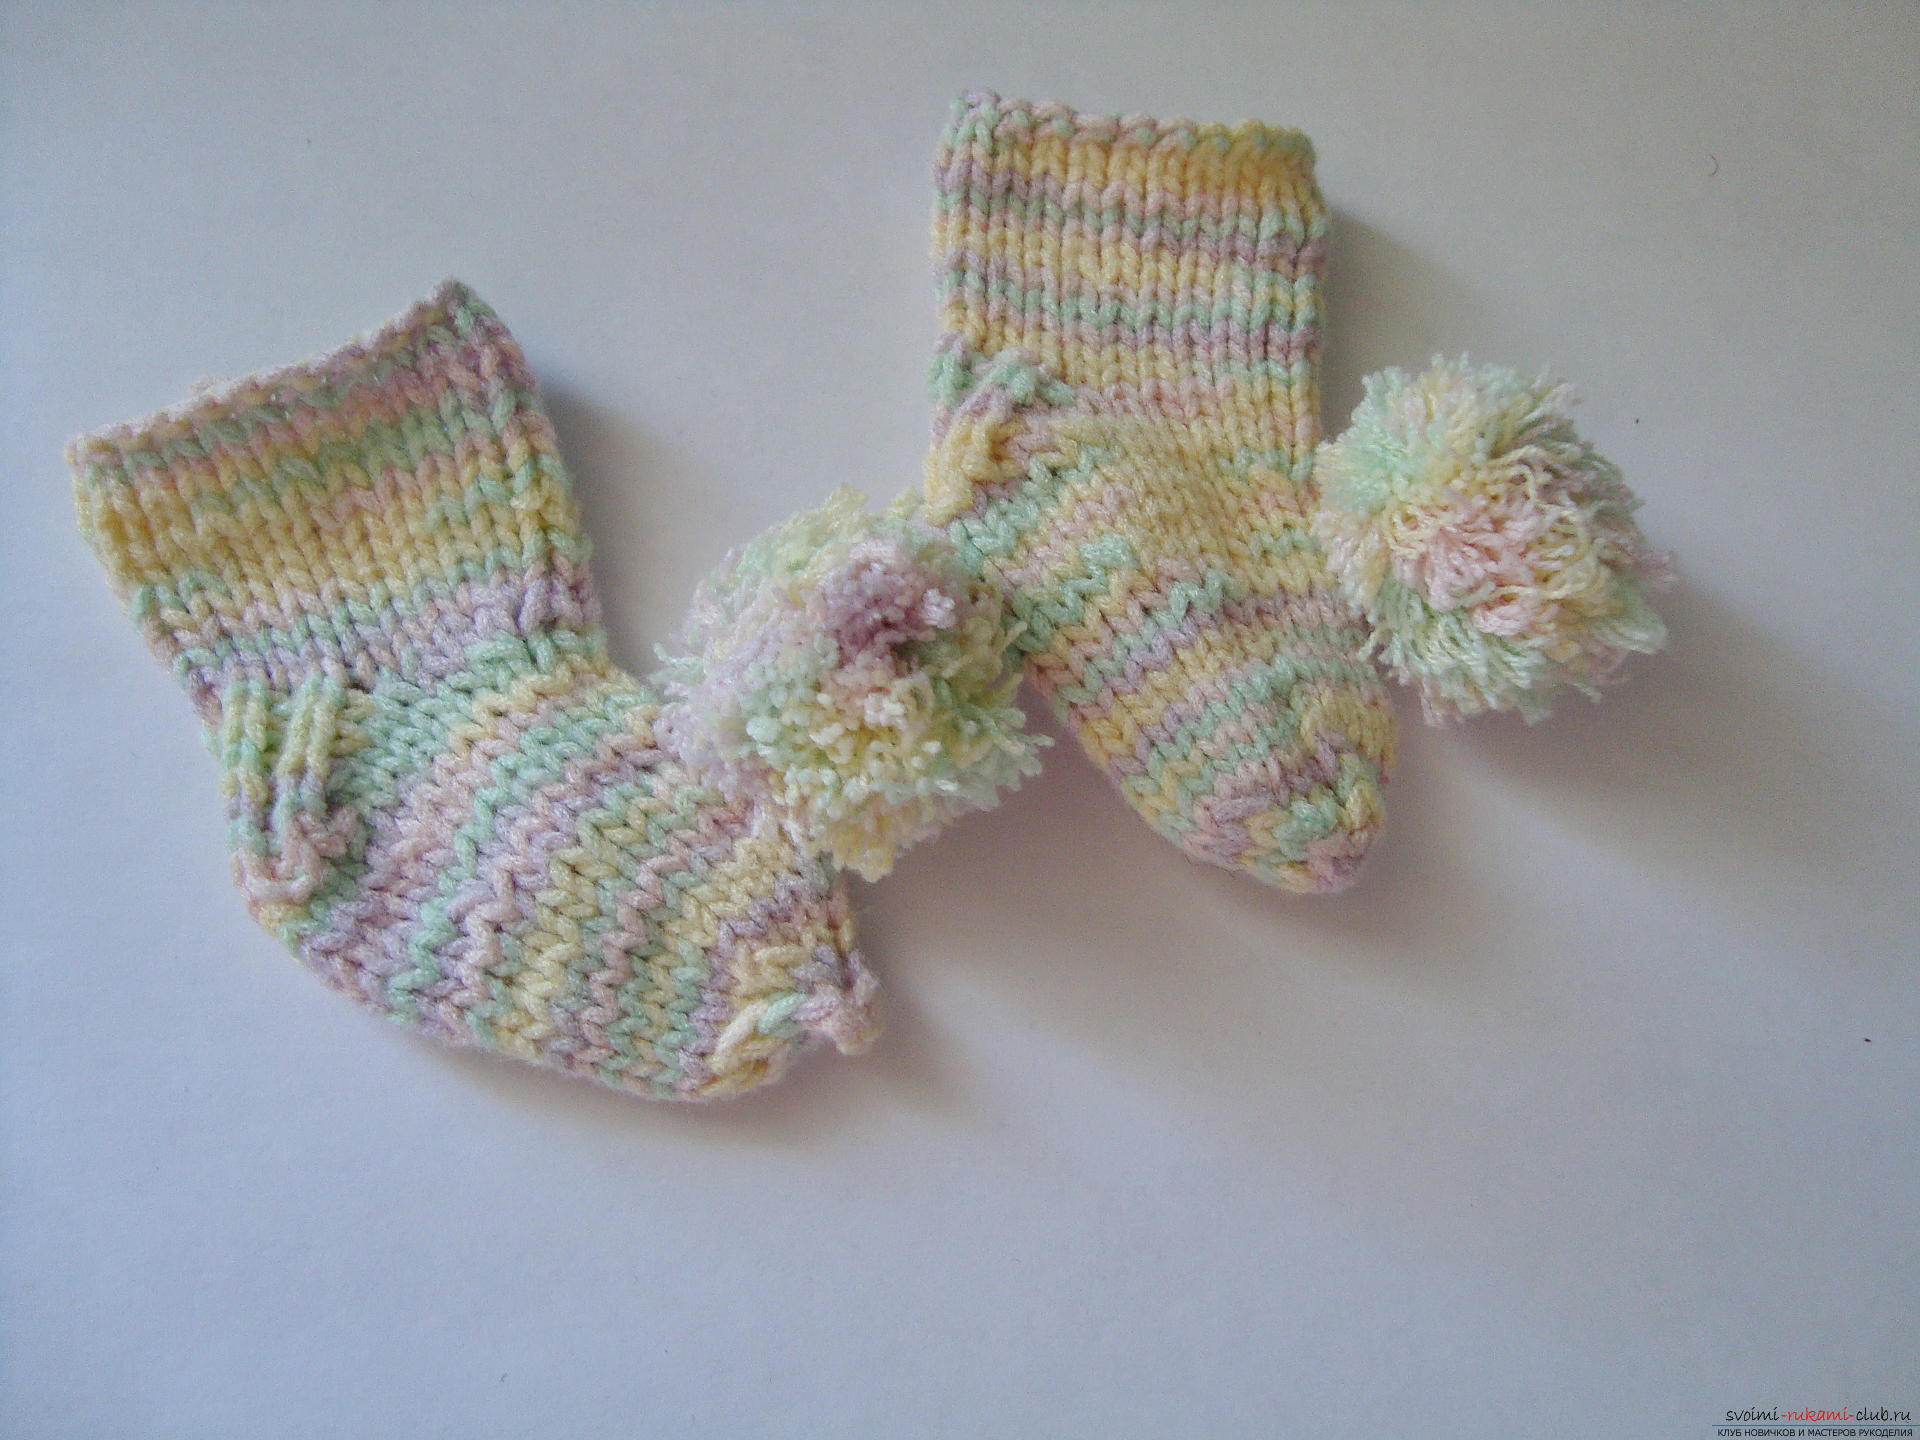 Knitted socks knitted on toothpicks - step by step instruction. Photo №1